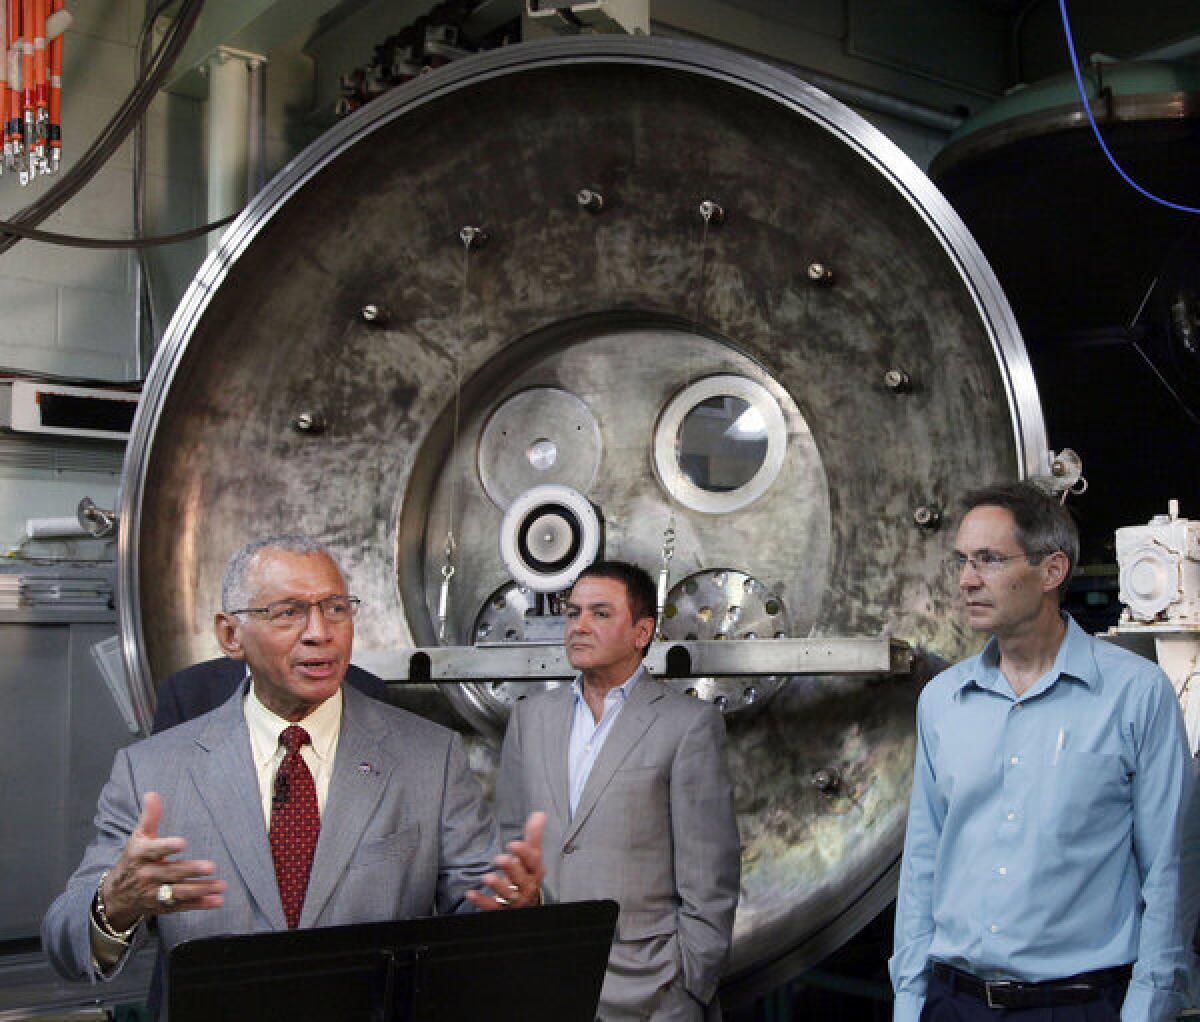 NASA Administrator Charles Bolden, left, is joined by Firouz Naderi, director for solar system exploration, and John Brophy, electric propulsion engineer, during Bolden's visit to the Jet Propulsion Laboratory in Pasadena on Thursday. NASA engineers are developing an ion engine for an asteroid capture mission later this decade.